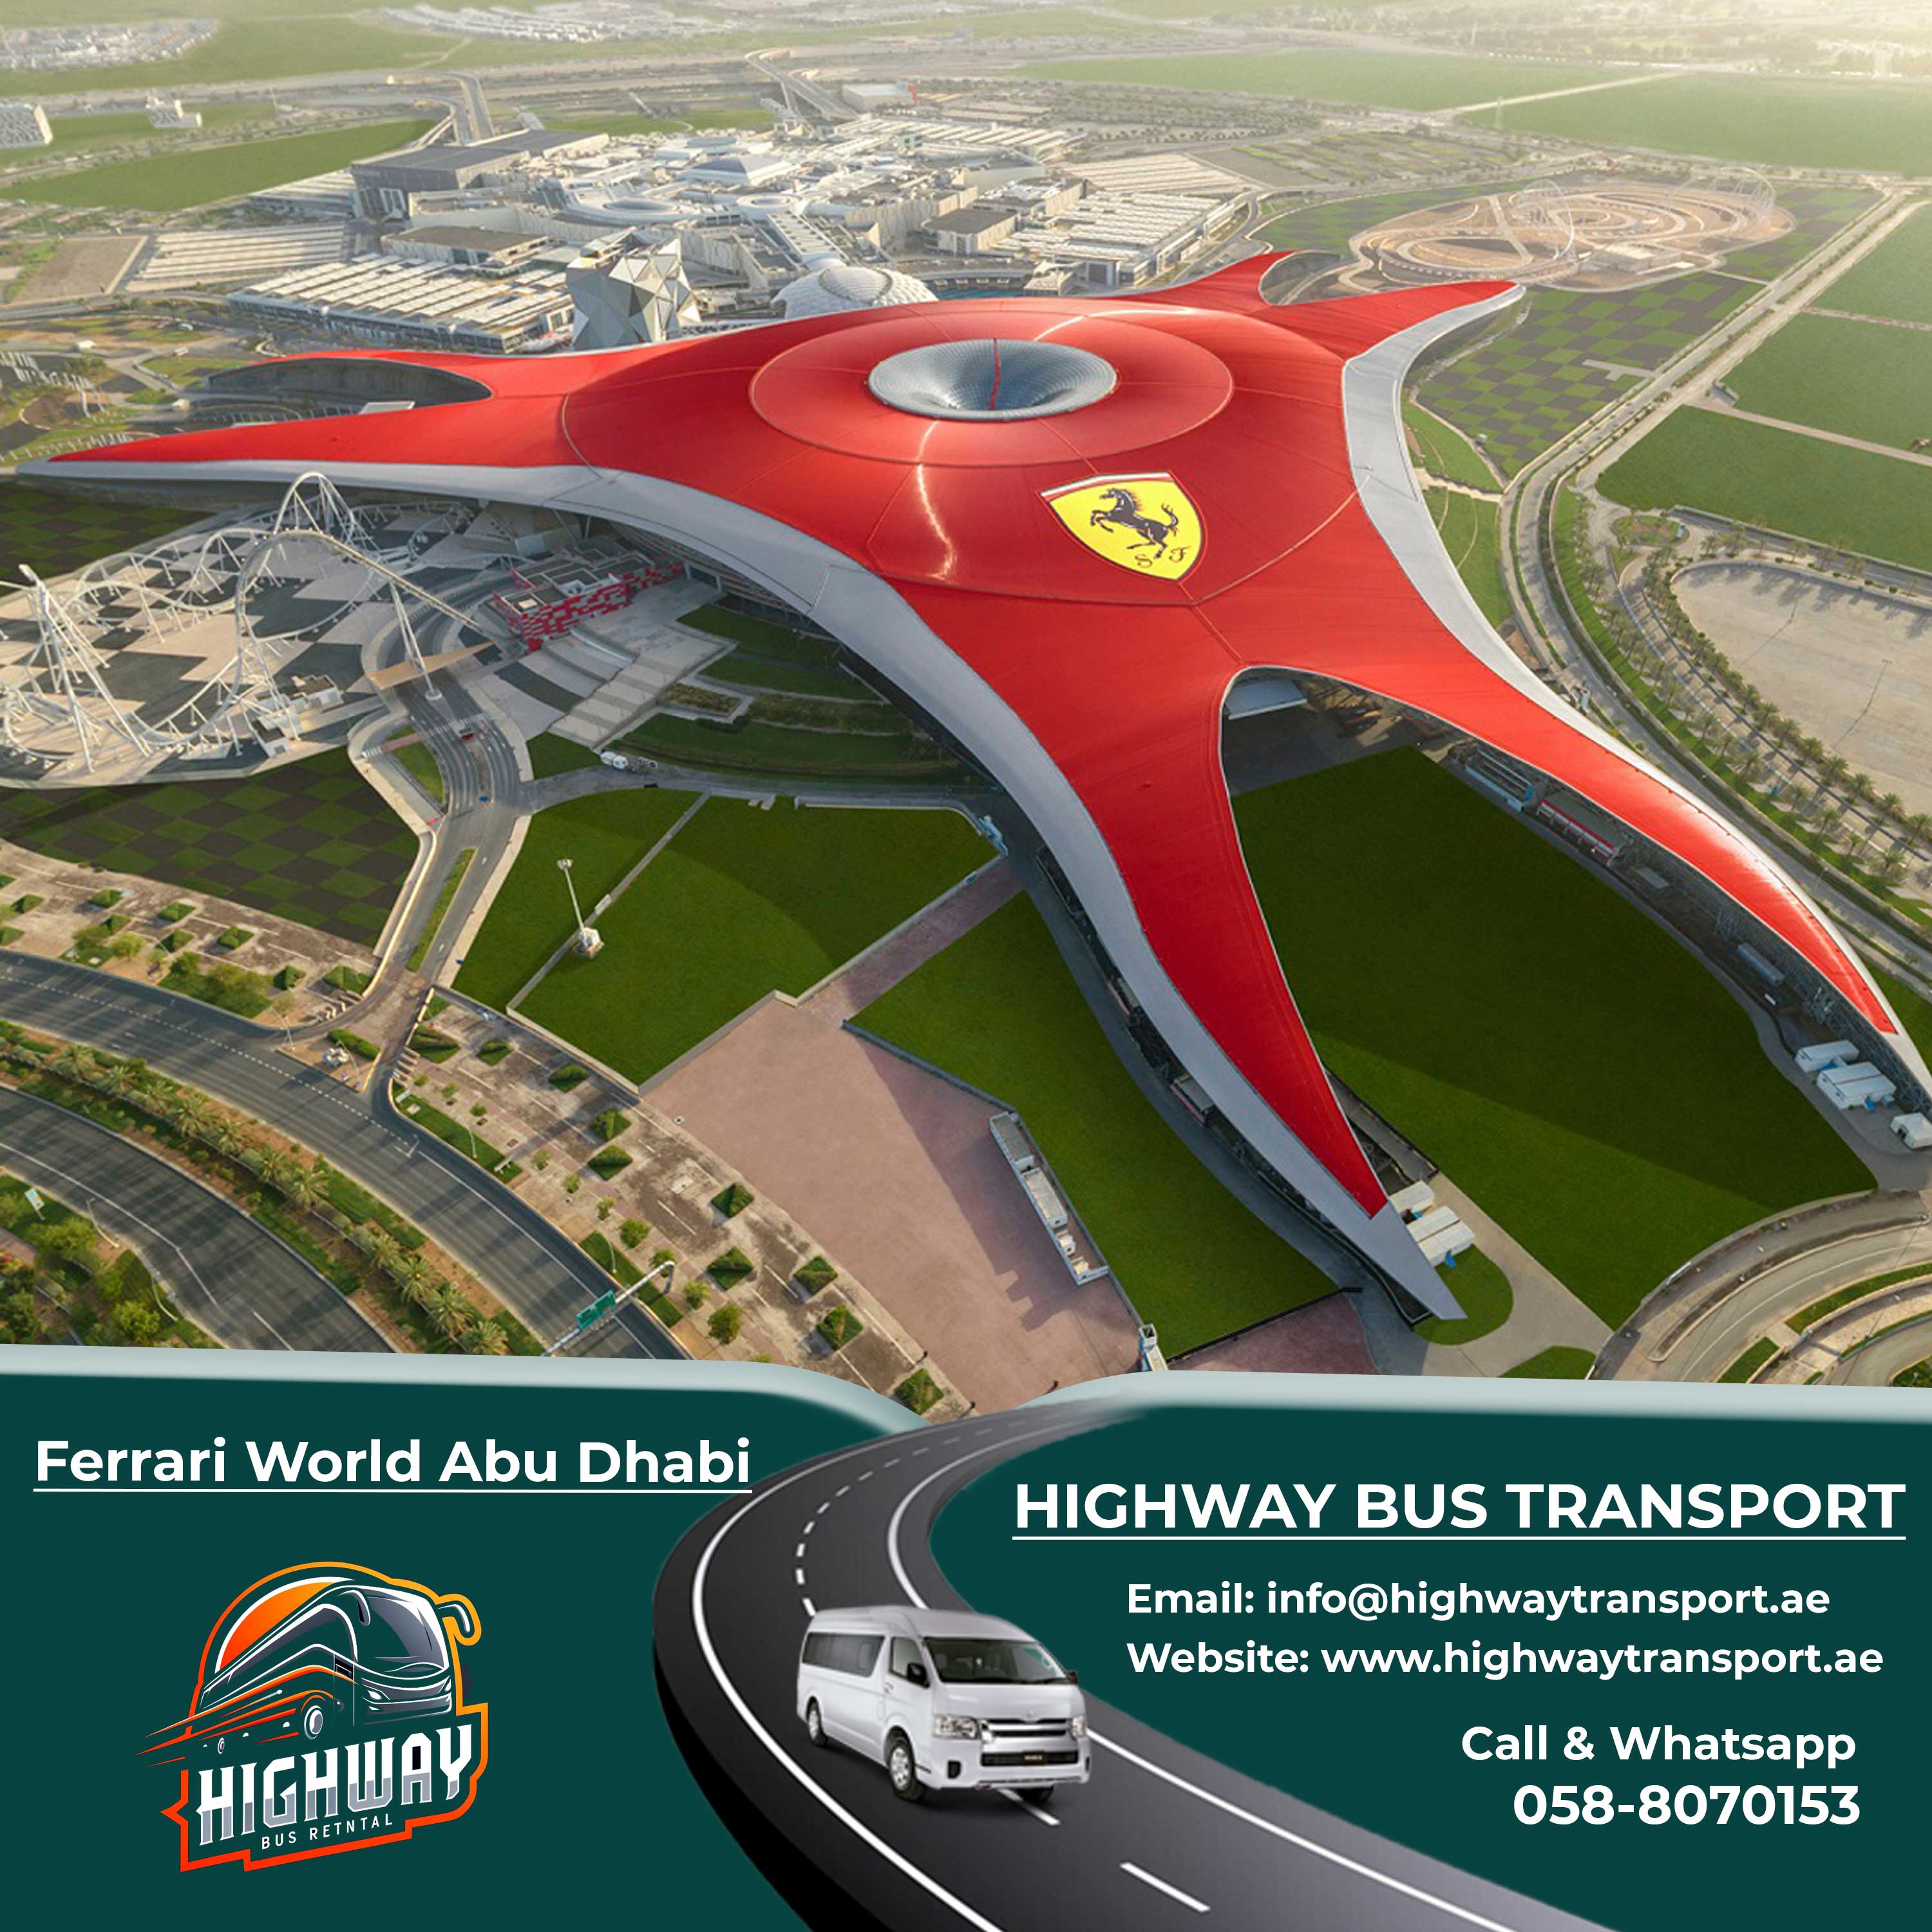 Image of Ferrari World Abu Dhabi showcasing thrilling rides, ticket prices, opening times, and family deals